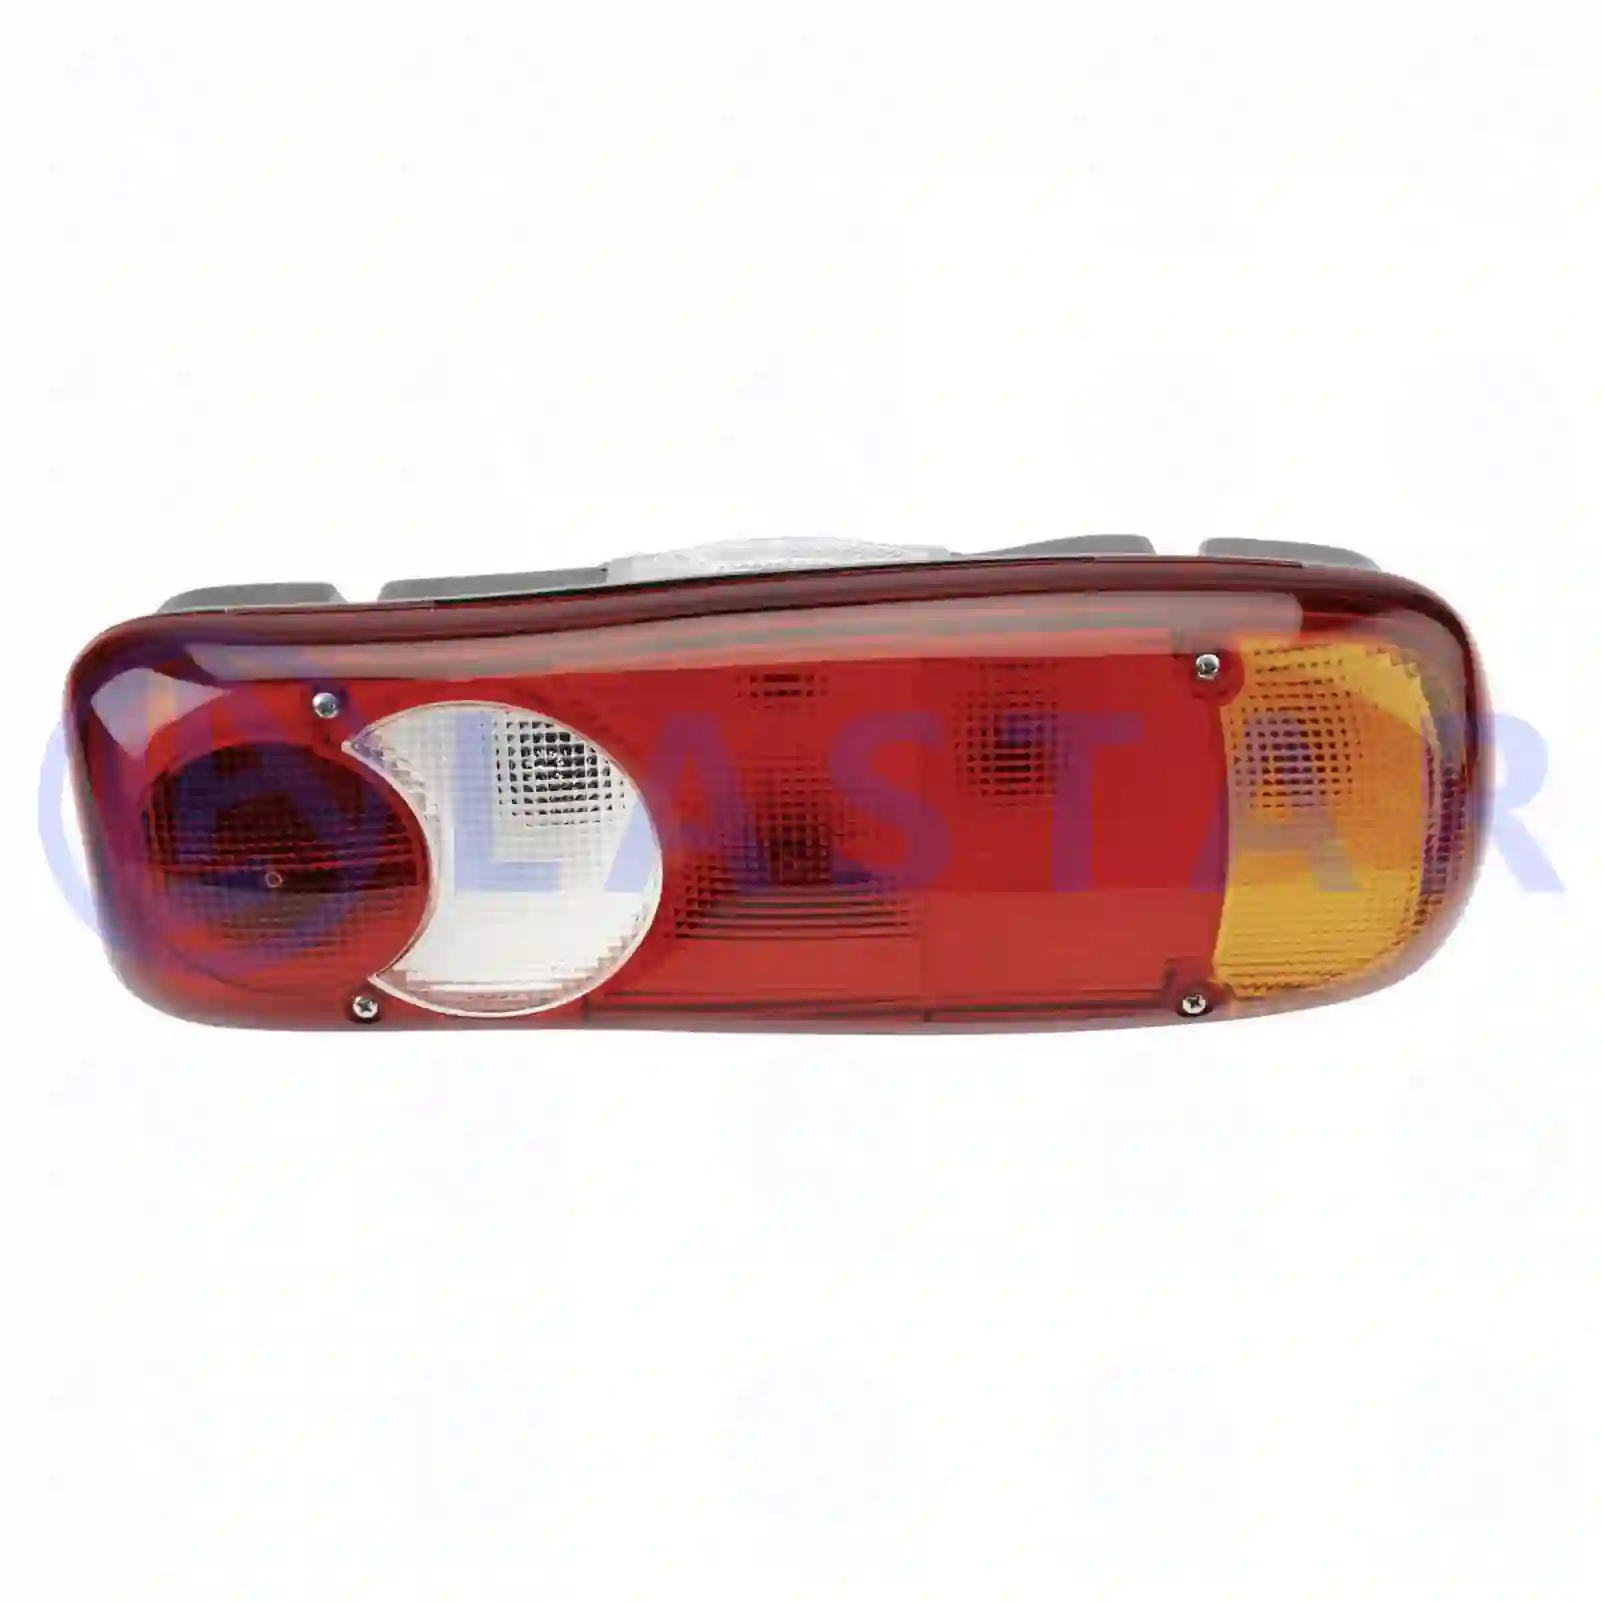 Tail lamp, left, 77711075, 7420862038, 20769783, ZG21005-0008, , ||  77711075 Lastar Spare Part | Truck Spare Parts, Auotomotive Spare Parts Tail lamp, left, 77711075, 7420862038, 20769783, ZG21005-0008, , ||  77711075 Lastar Spare Part | Truck Spare Parts, Auotomotive Spare Parts